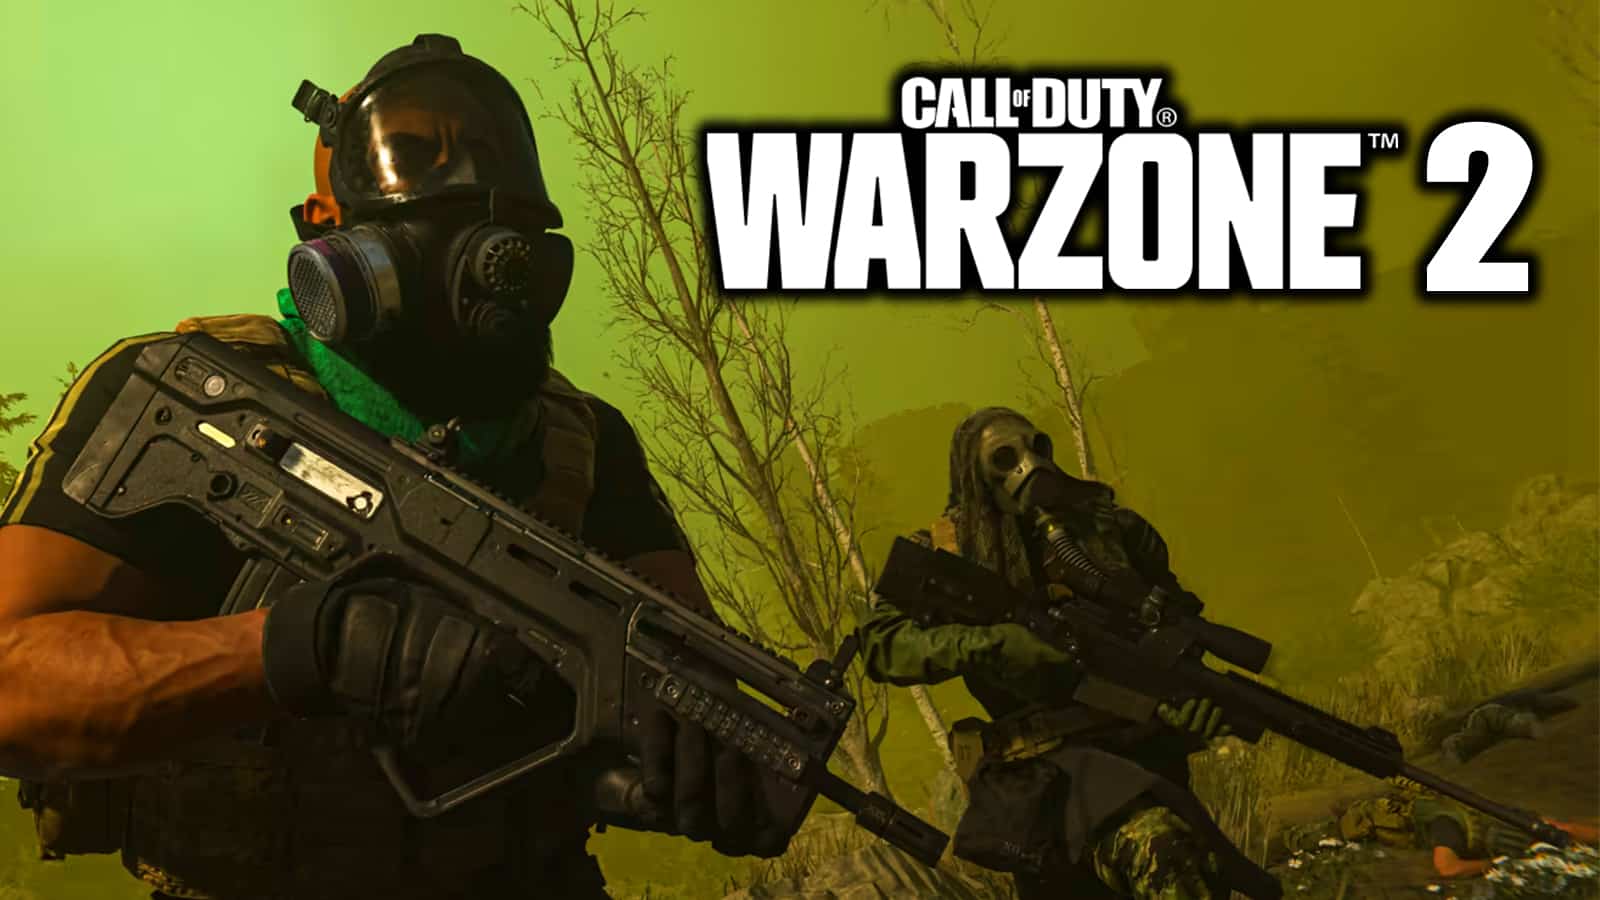 A concept image for Call of Duty Warzone 2.